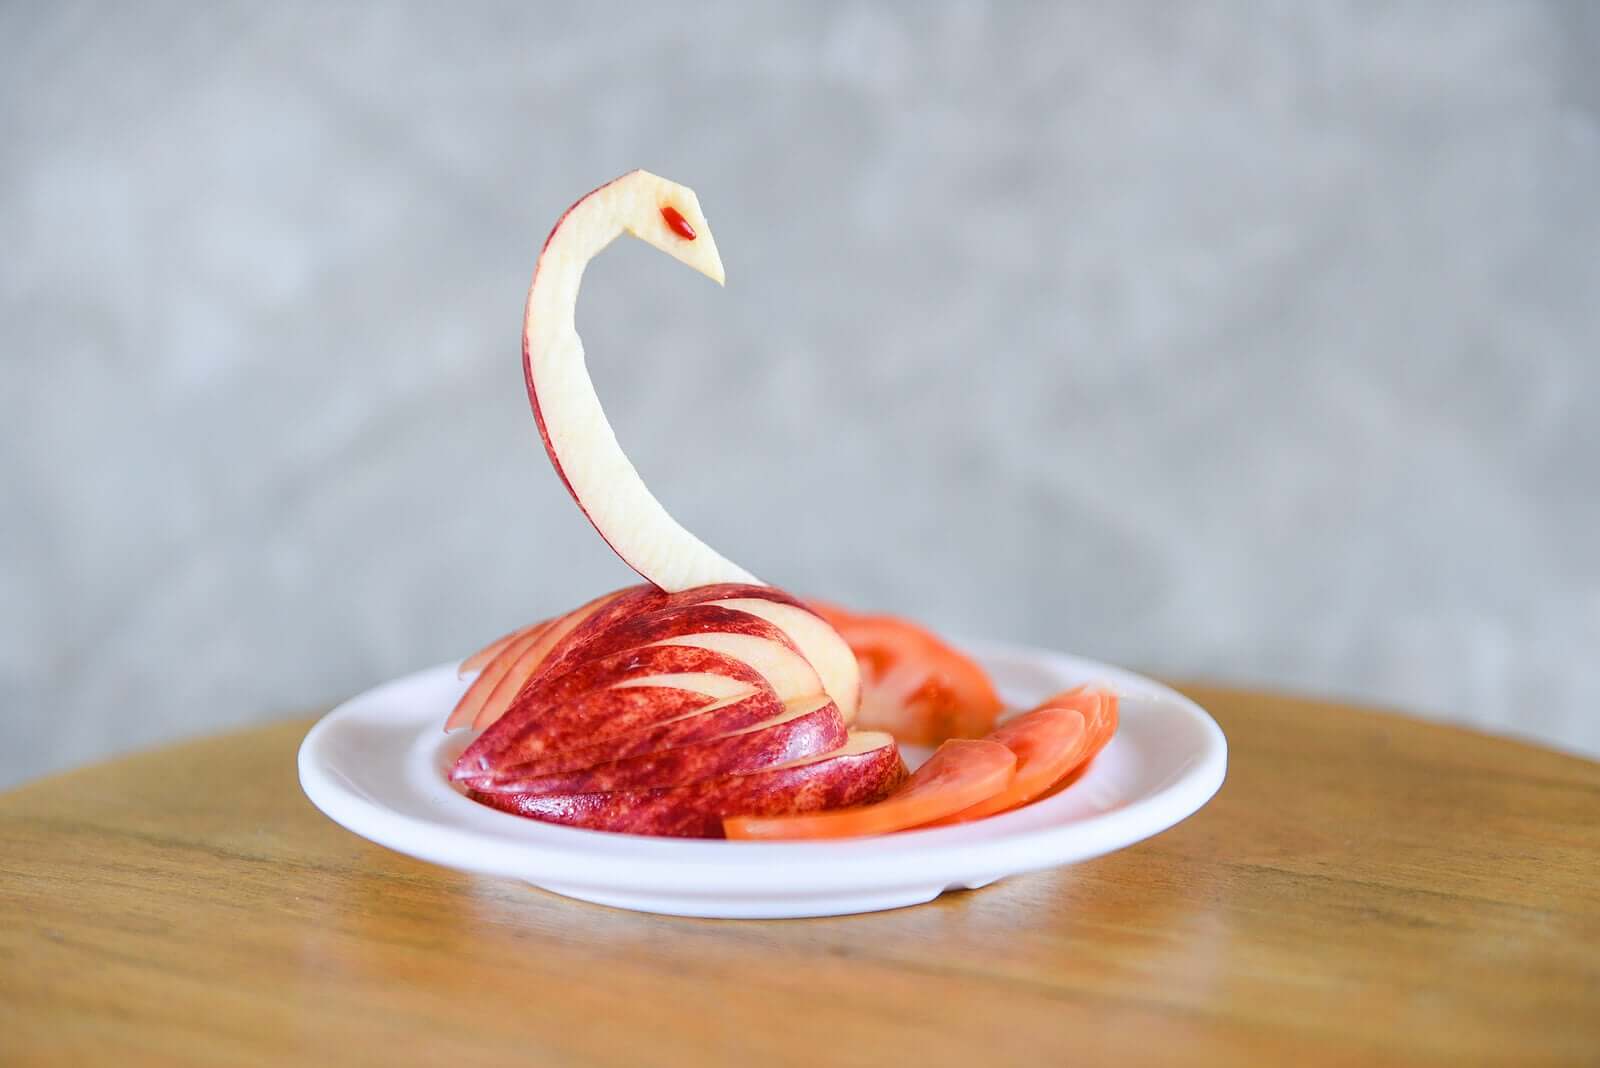 Mukimono Art: Children's Dishes You Can Eat with Your Eyes